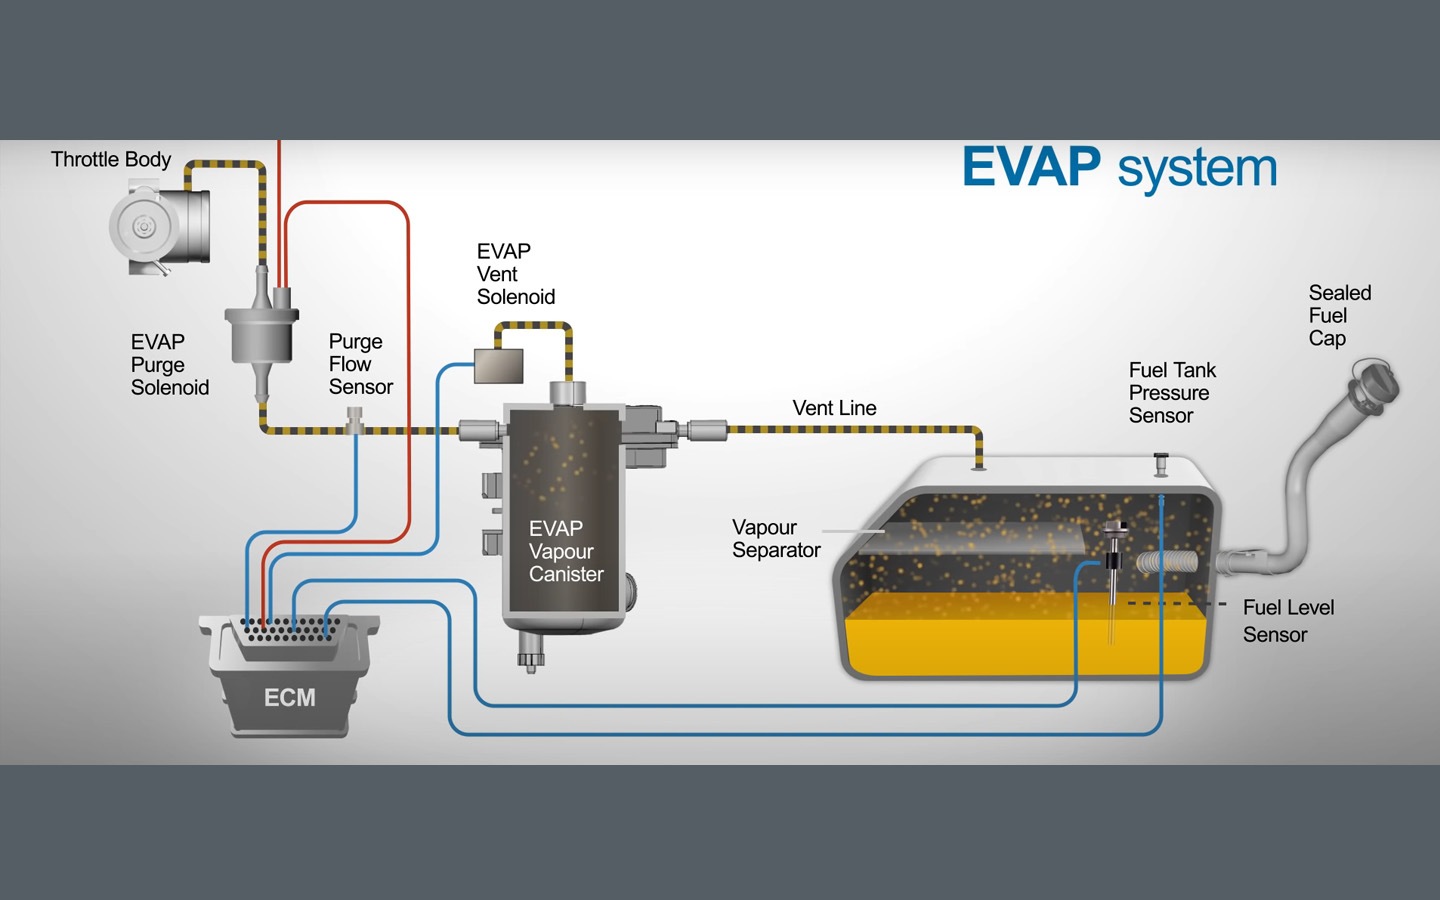 EVAP system captures fuel vapours and prevent them from escaping into the atmosphere